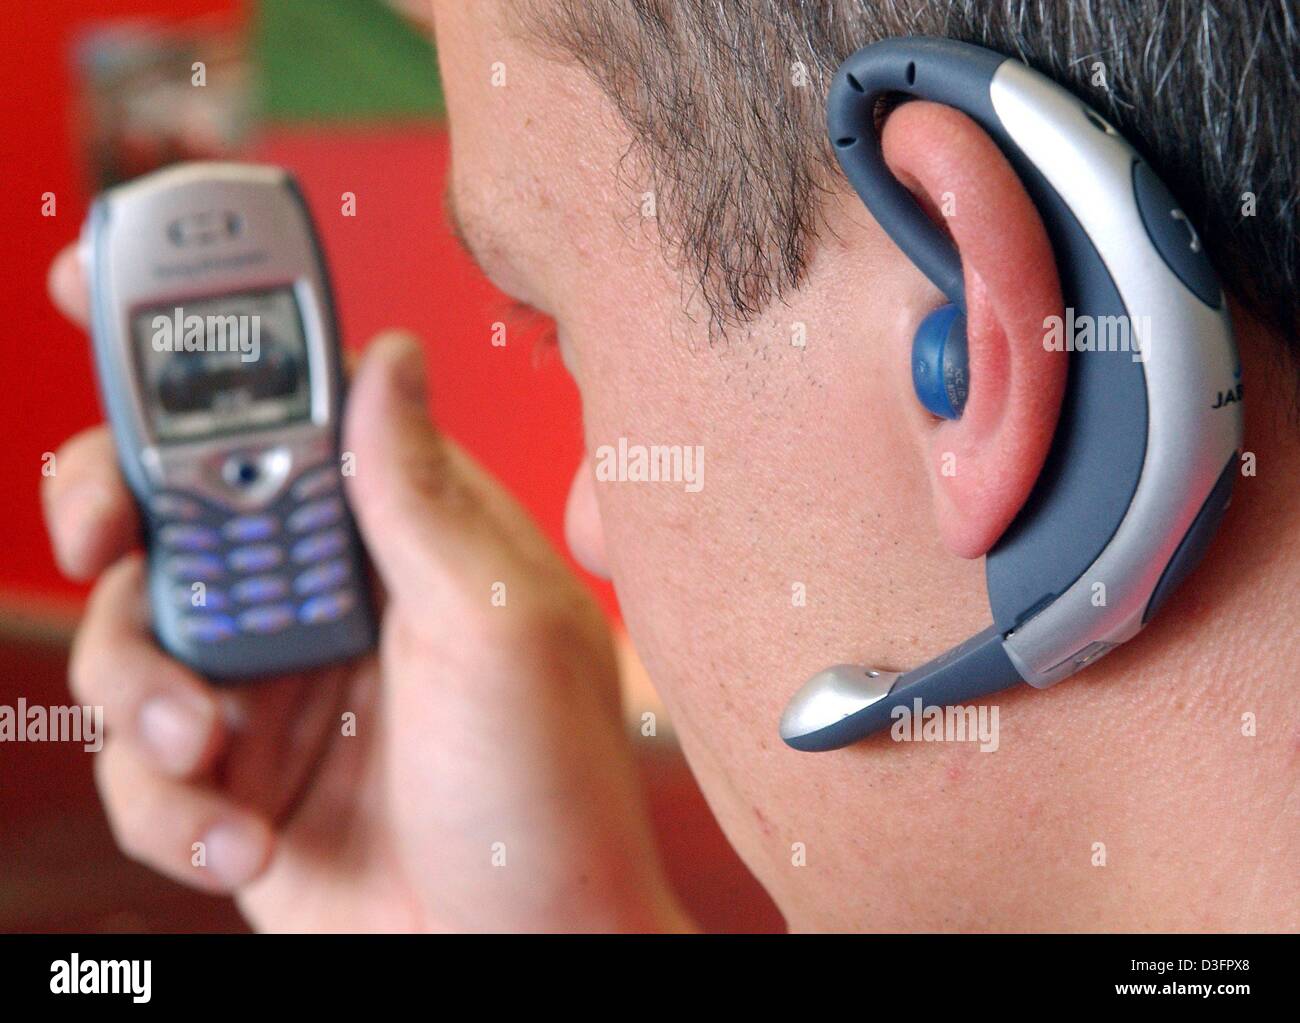 dpa) - A user wears a Bluetooth earplug Jabra BT-200 which be used for hands-free with a mobile phone, in Leipzig, Germany, 6 April 2003. The Bluetooth wireless connection works